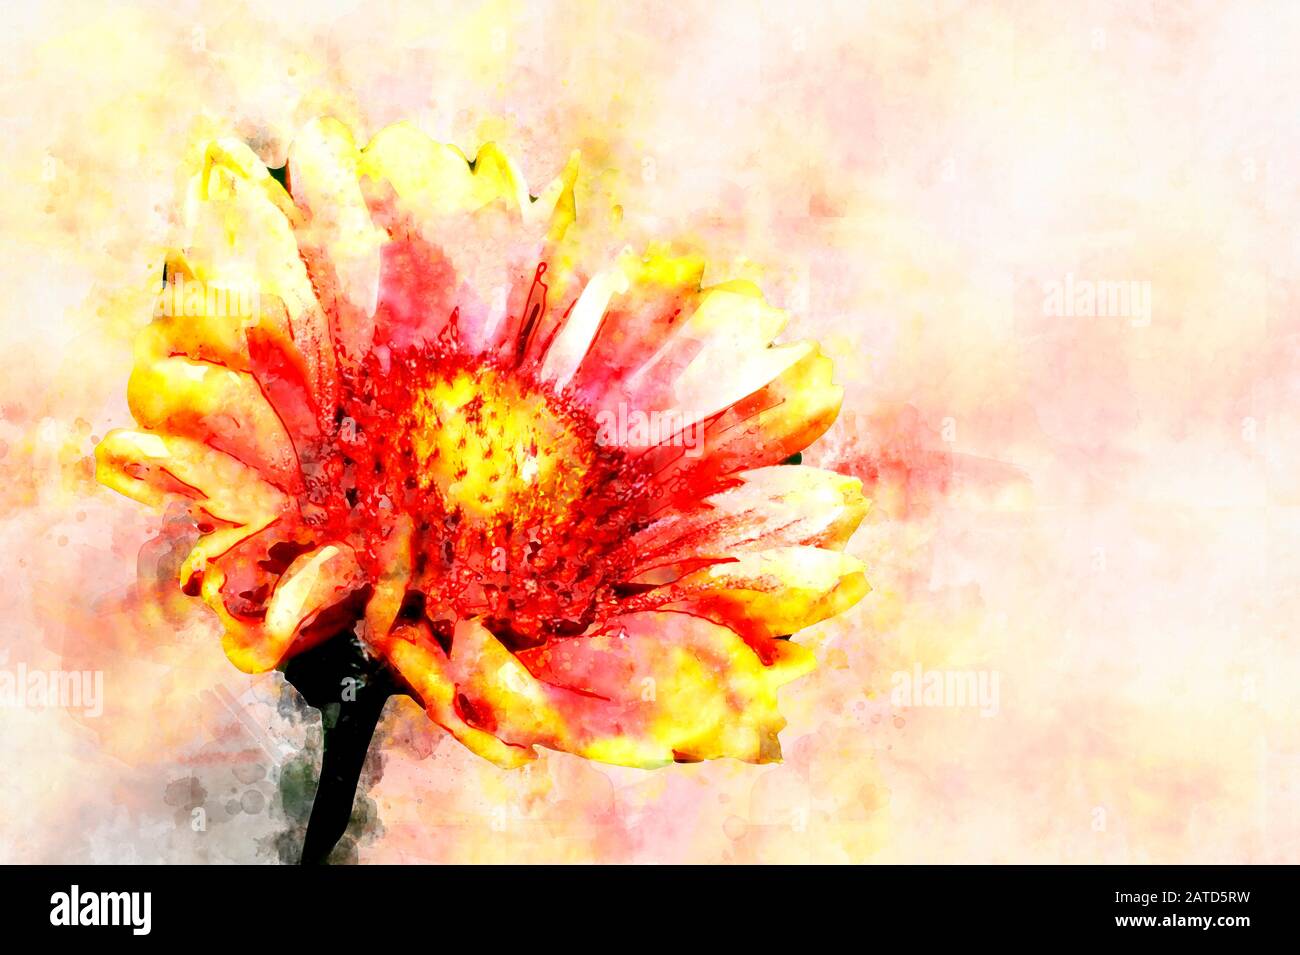 Red Helenium flower close-up on green grass background. Stylization in watercolor drawing Stock Photo